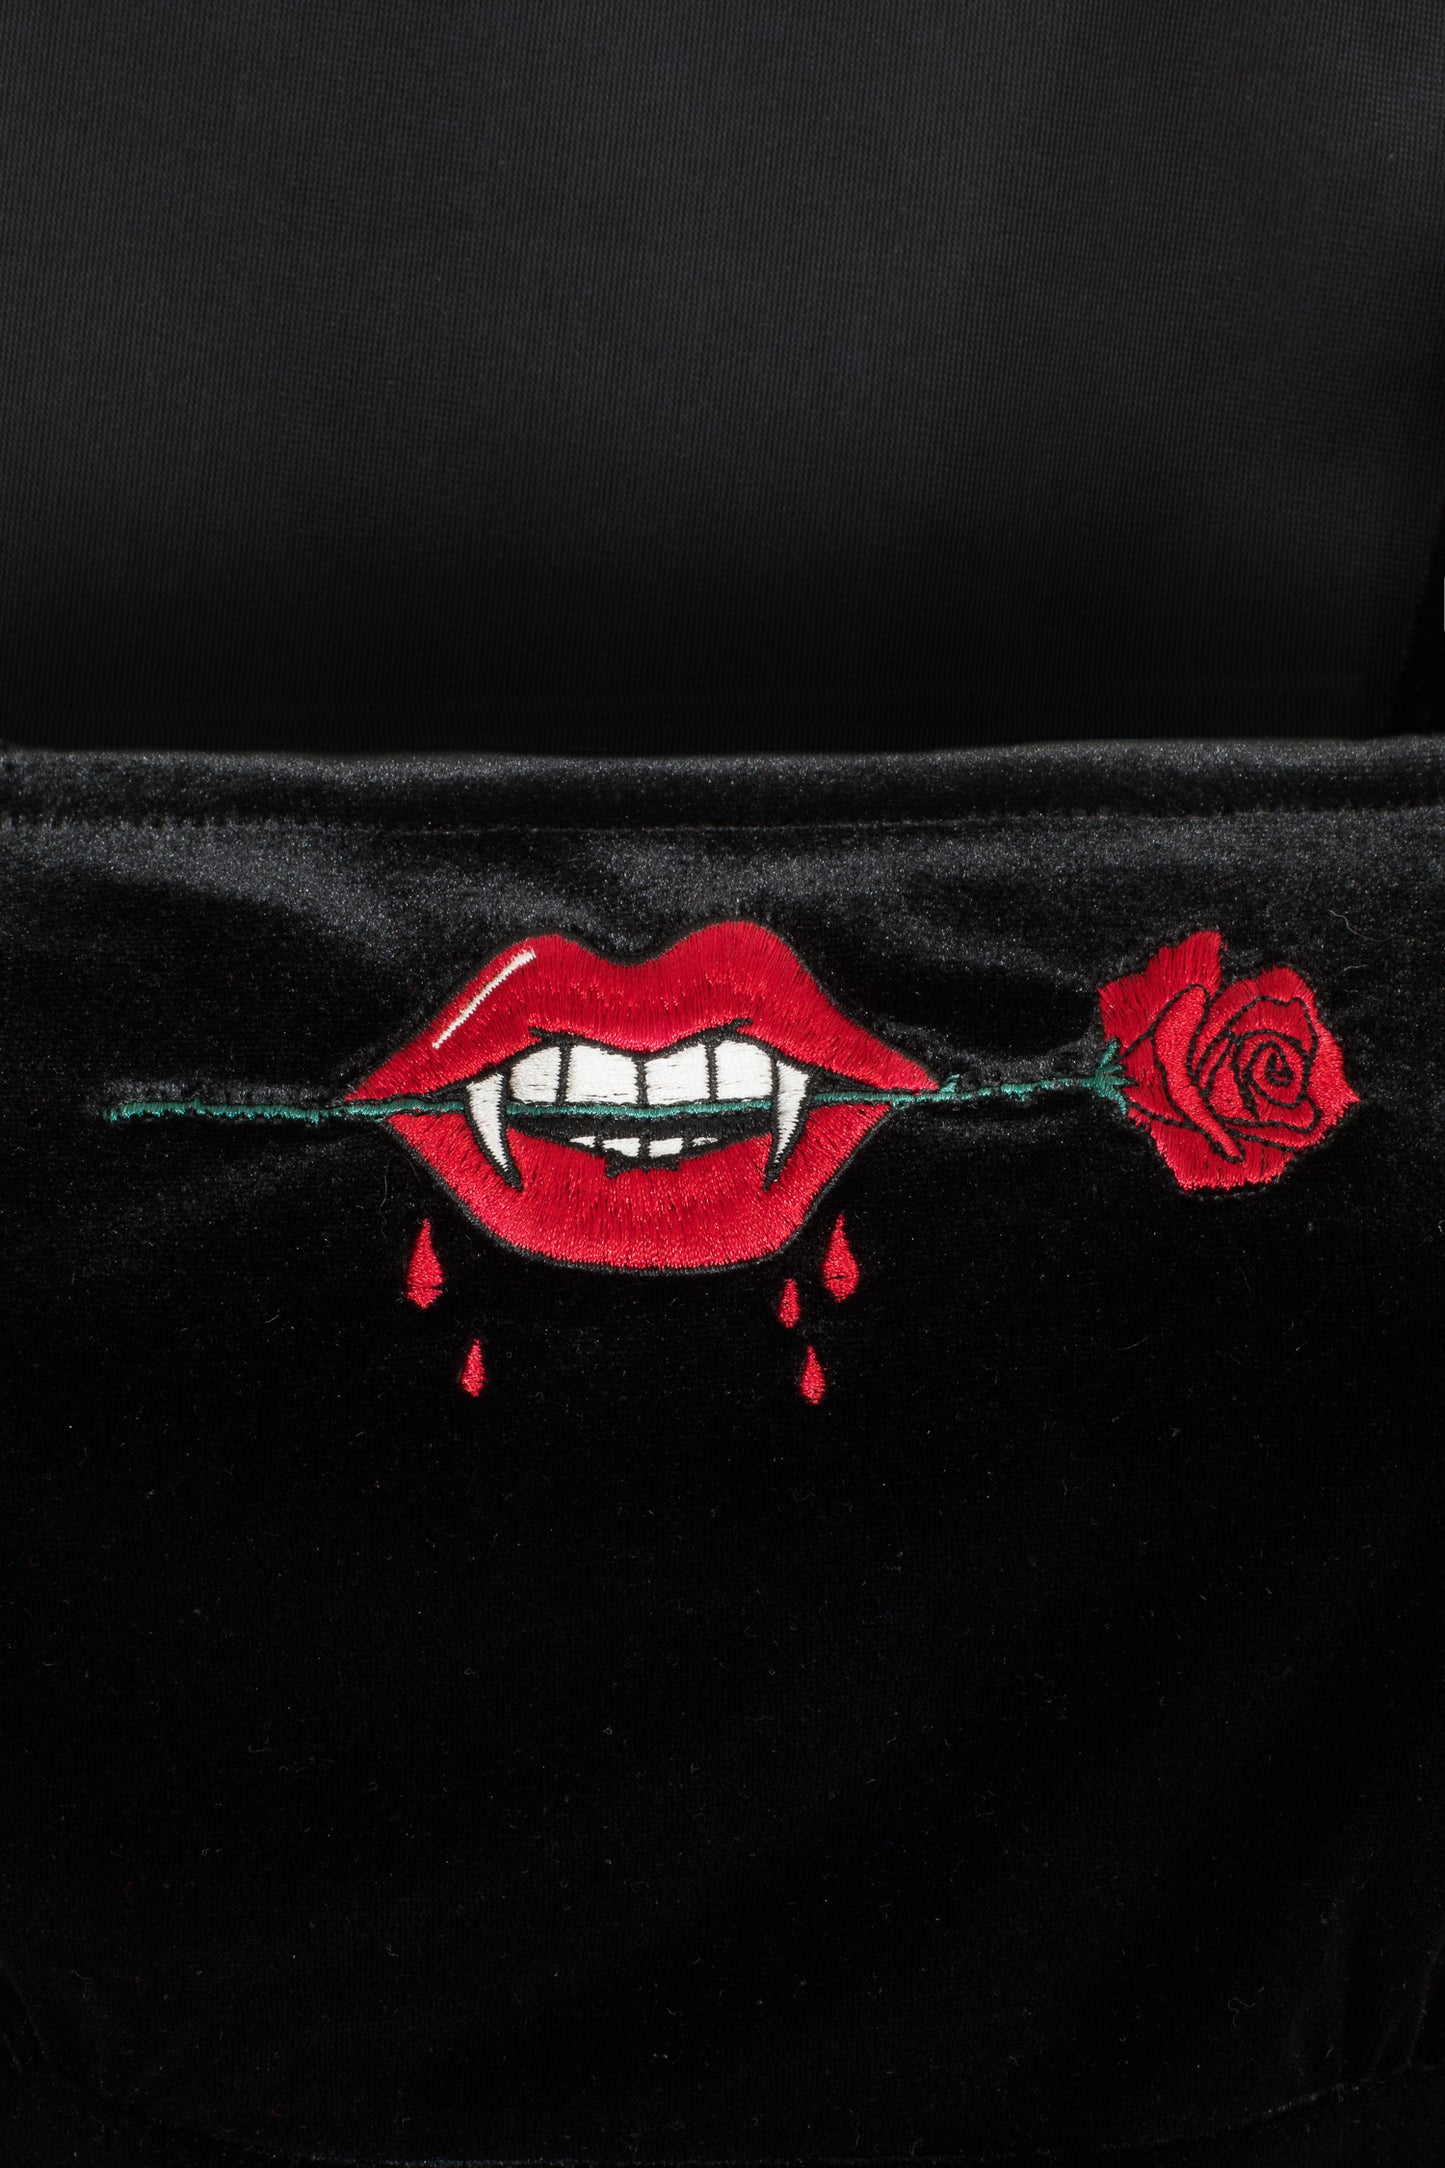 Lilith Fangs Crop Top by Hell Bunny